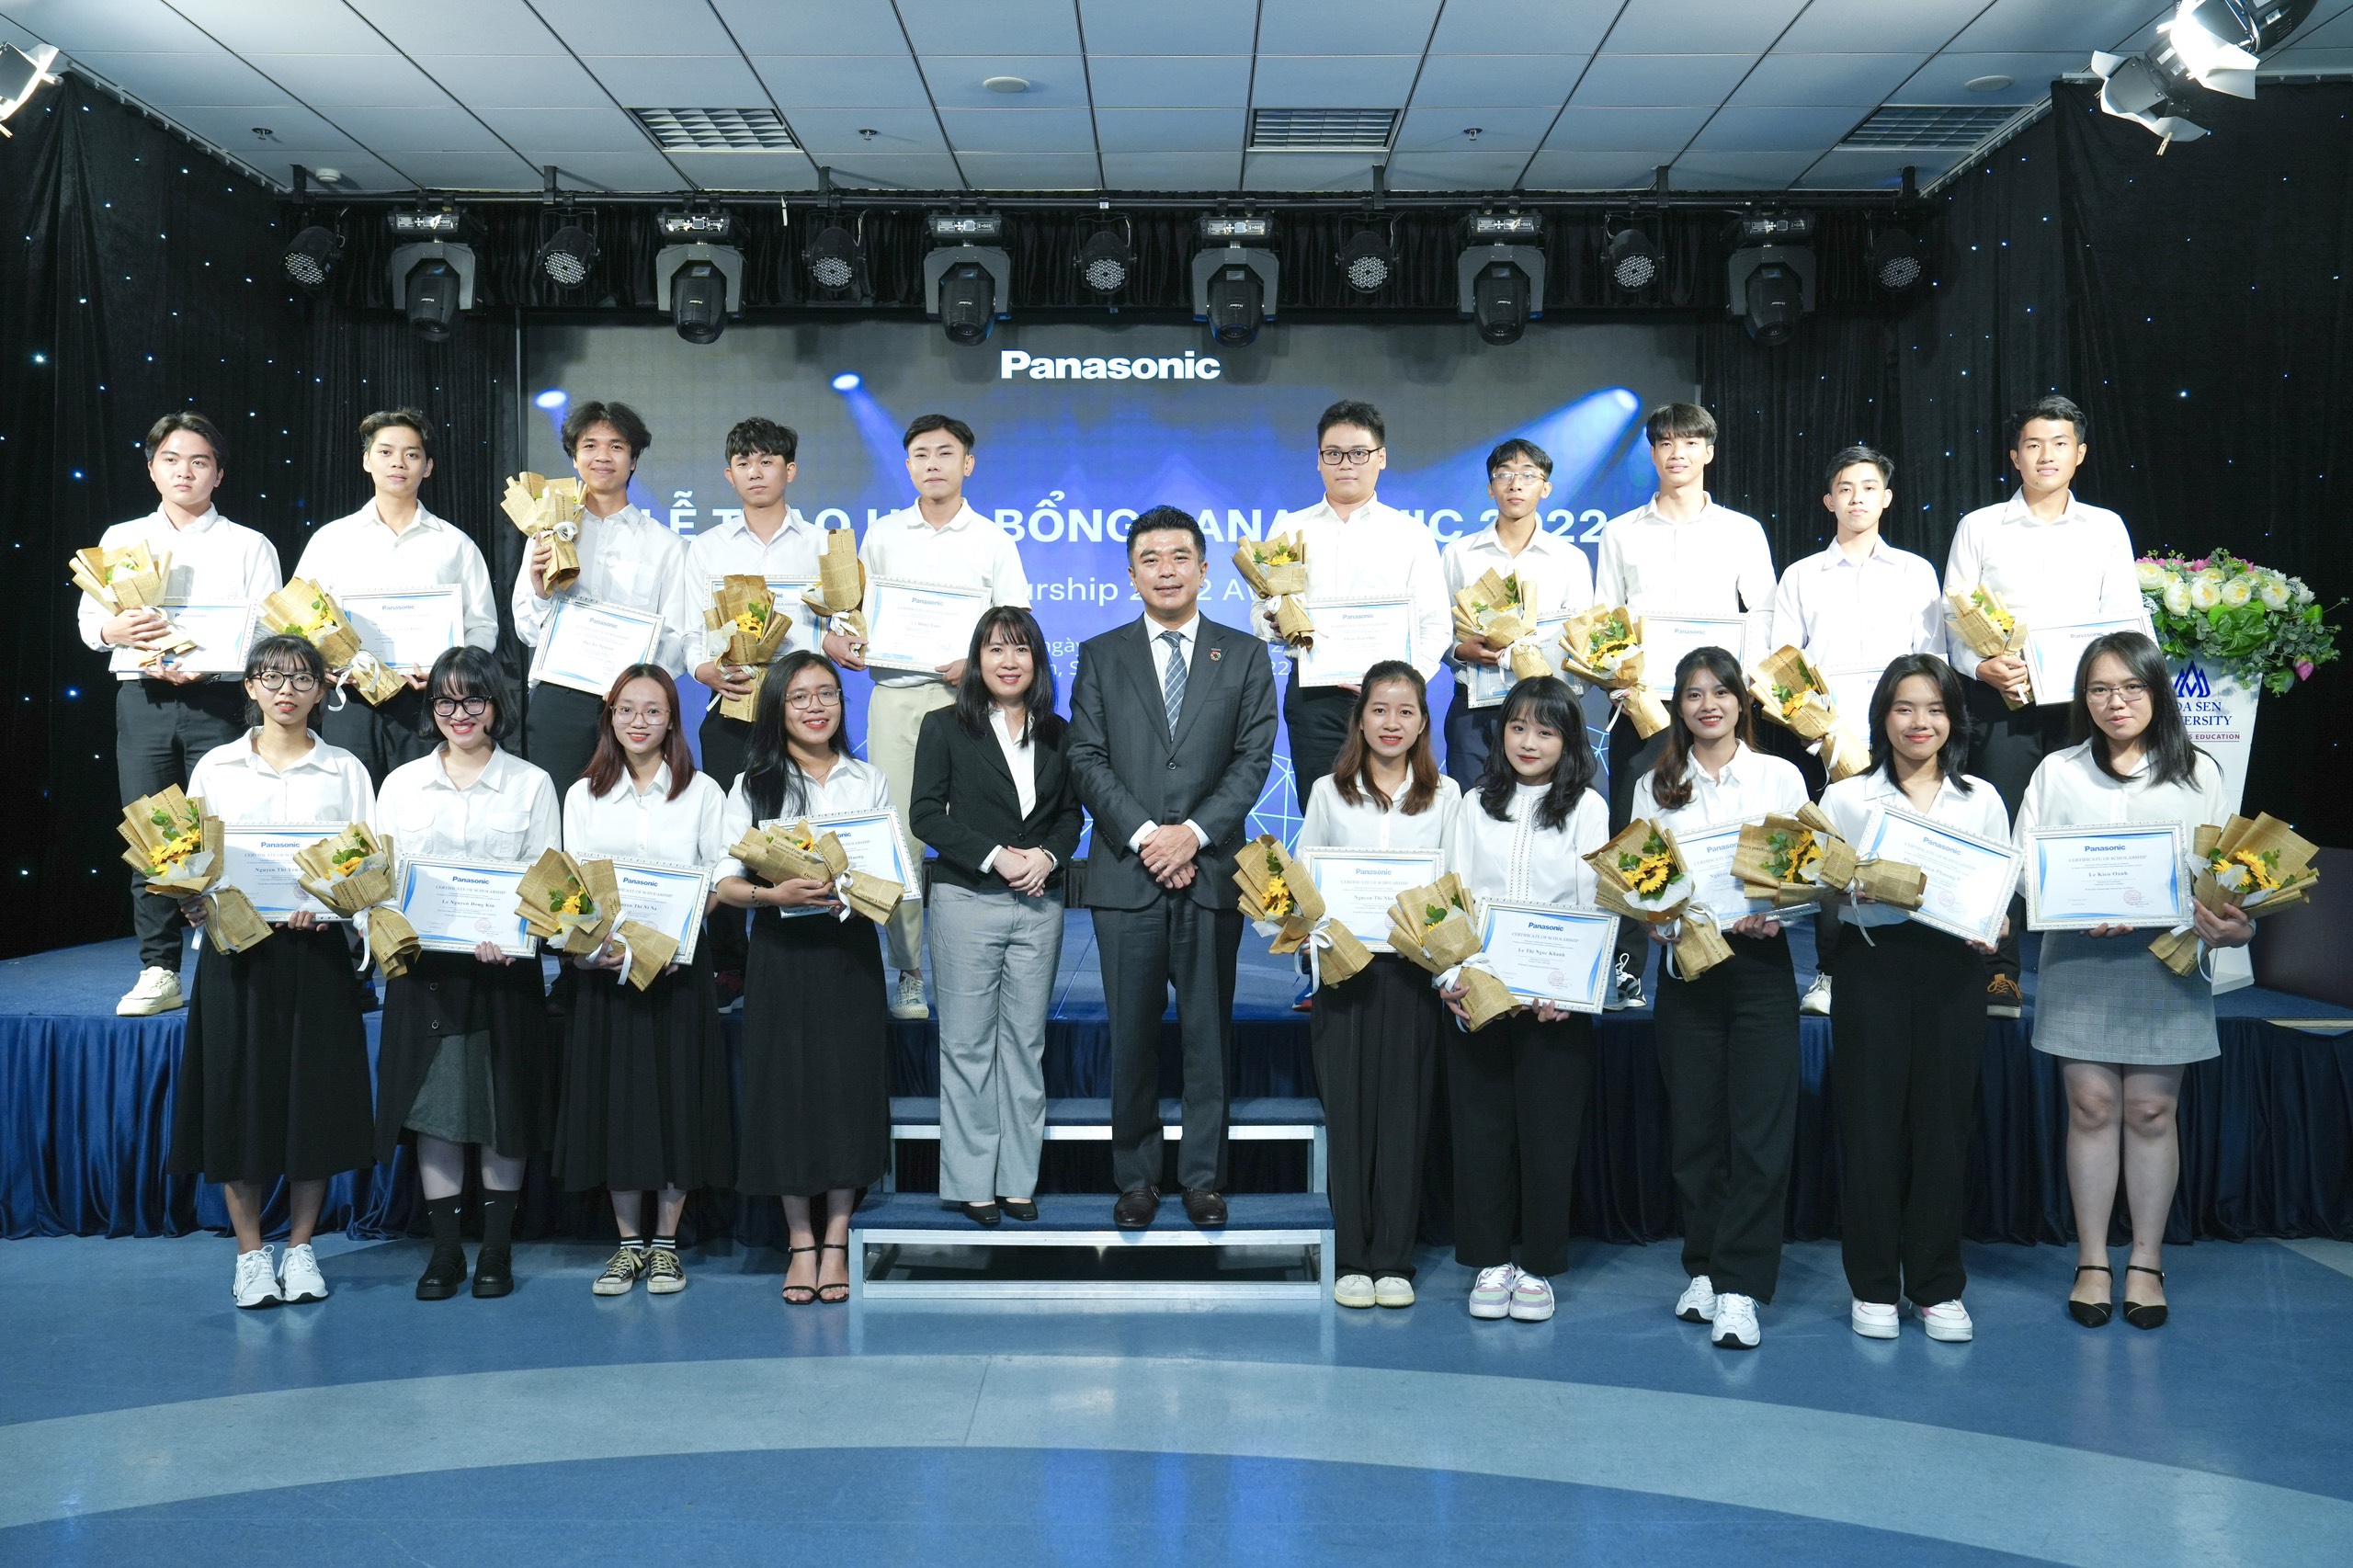 Photo: 20 talented students across Vietnam have been encouraged with Panasonic scholarships